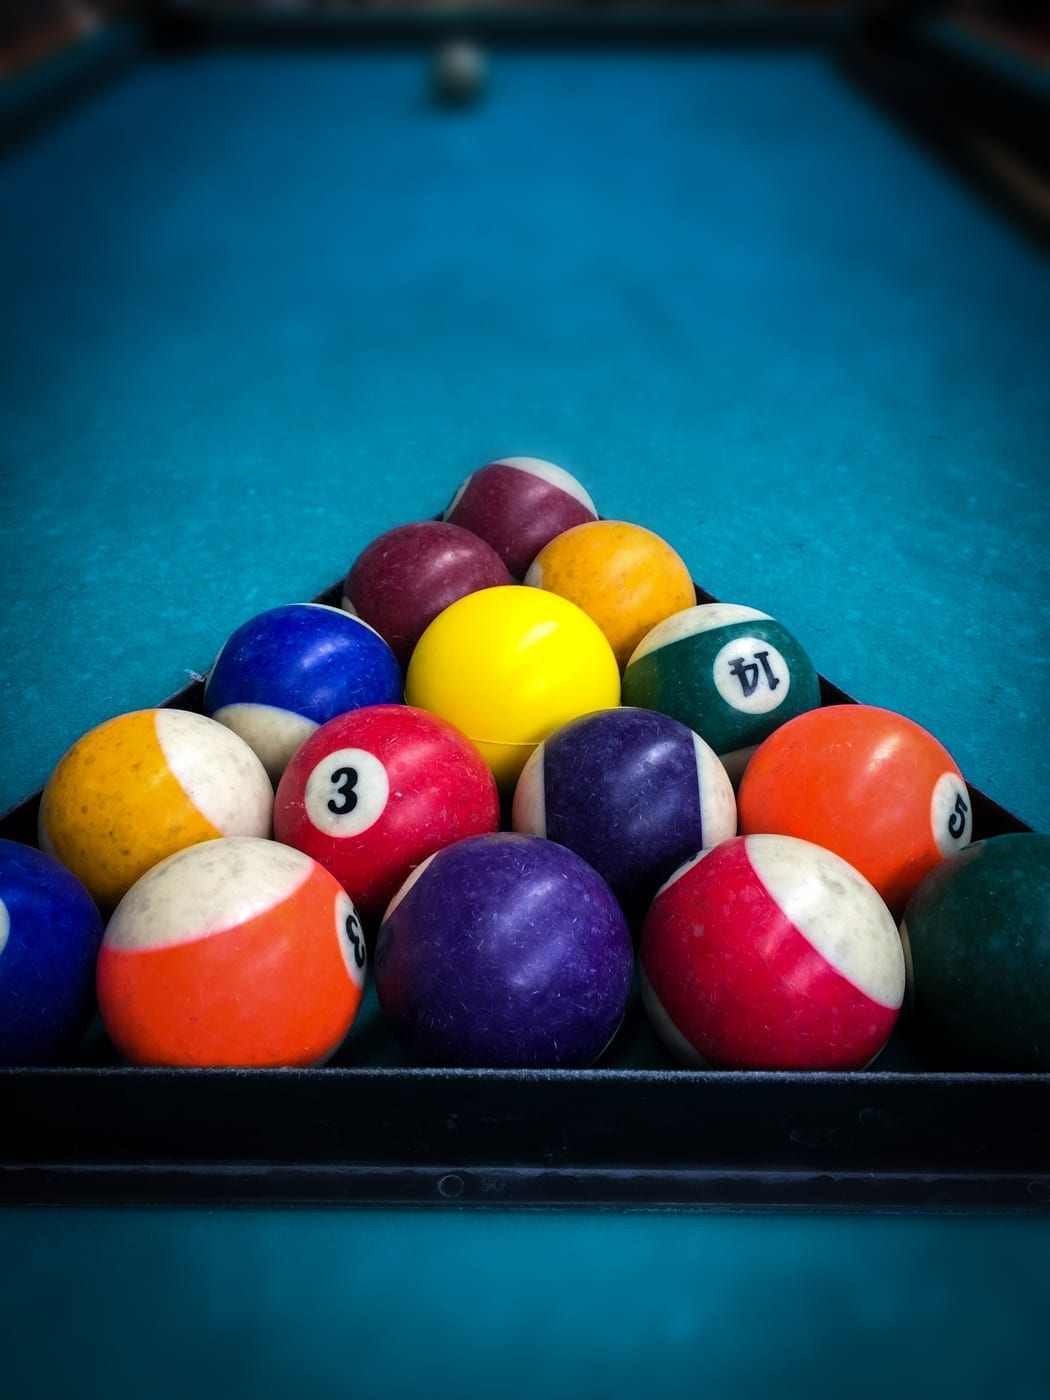 Featured image for “Pool”